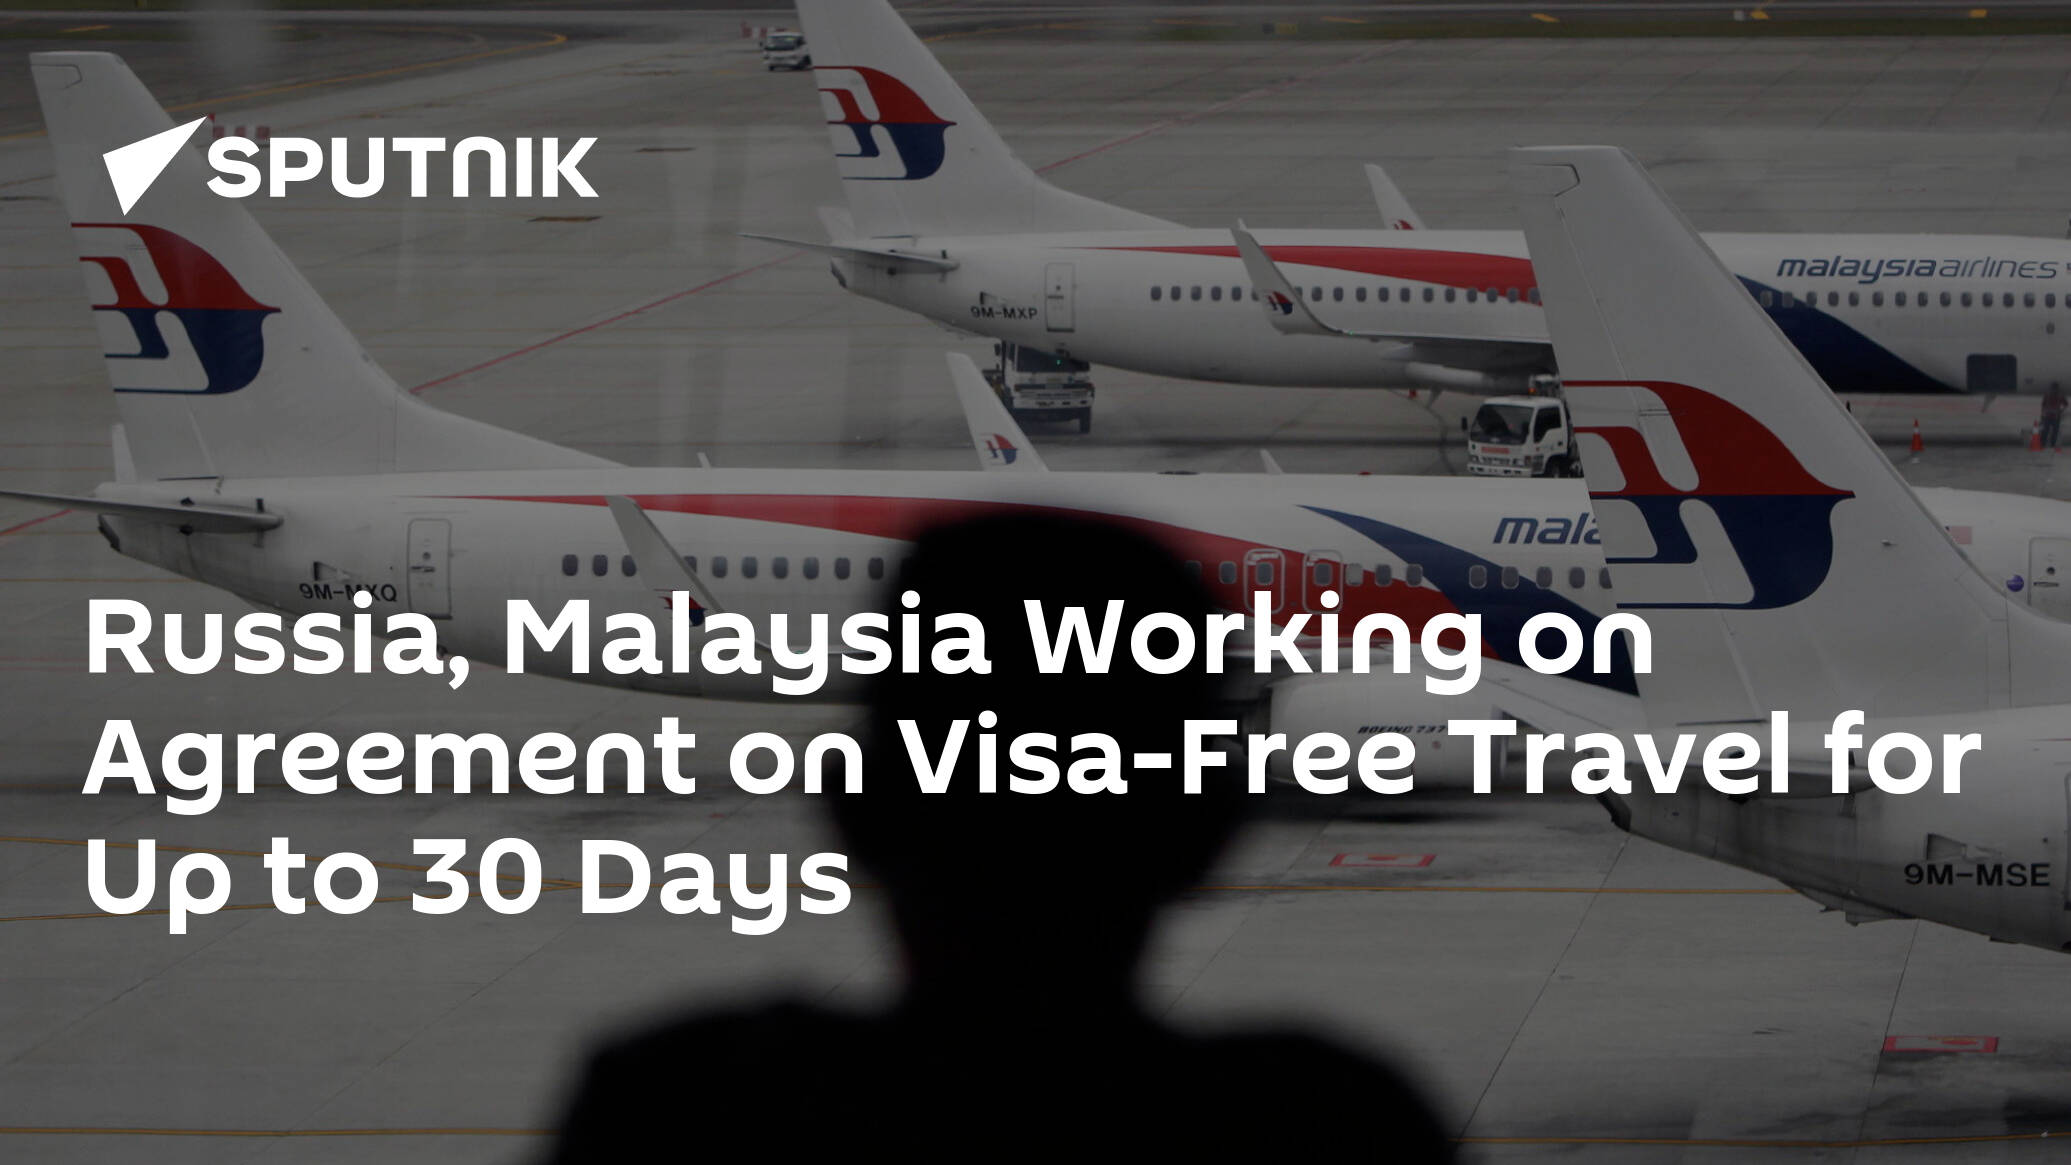 Russia, Malaysia Working on Agreement on Visa-Free Travel for Up to 30 Days